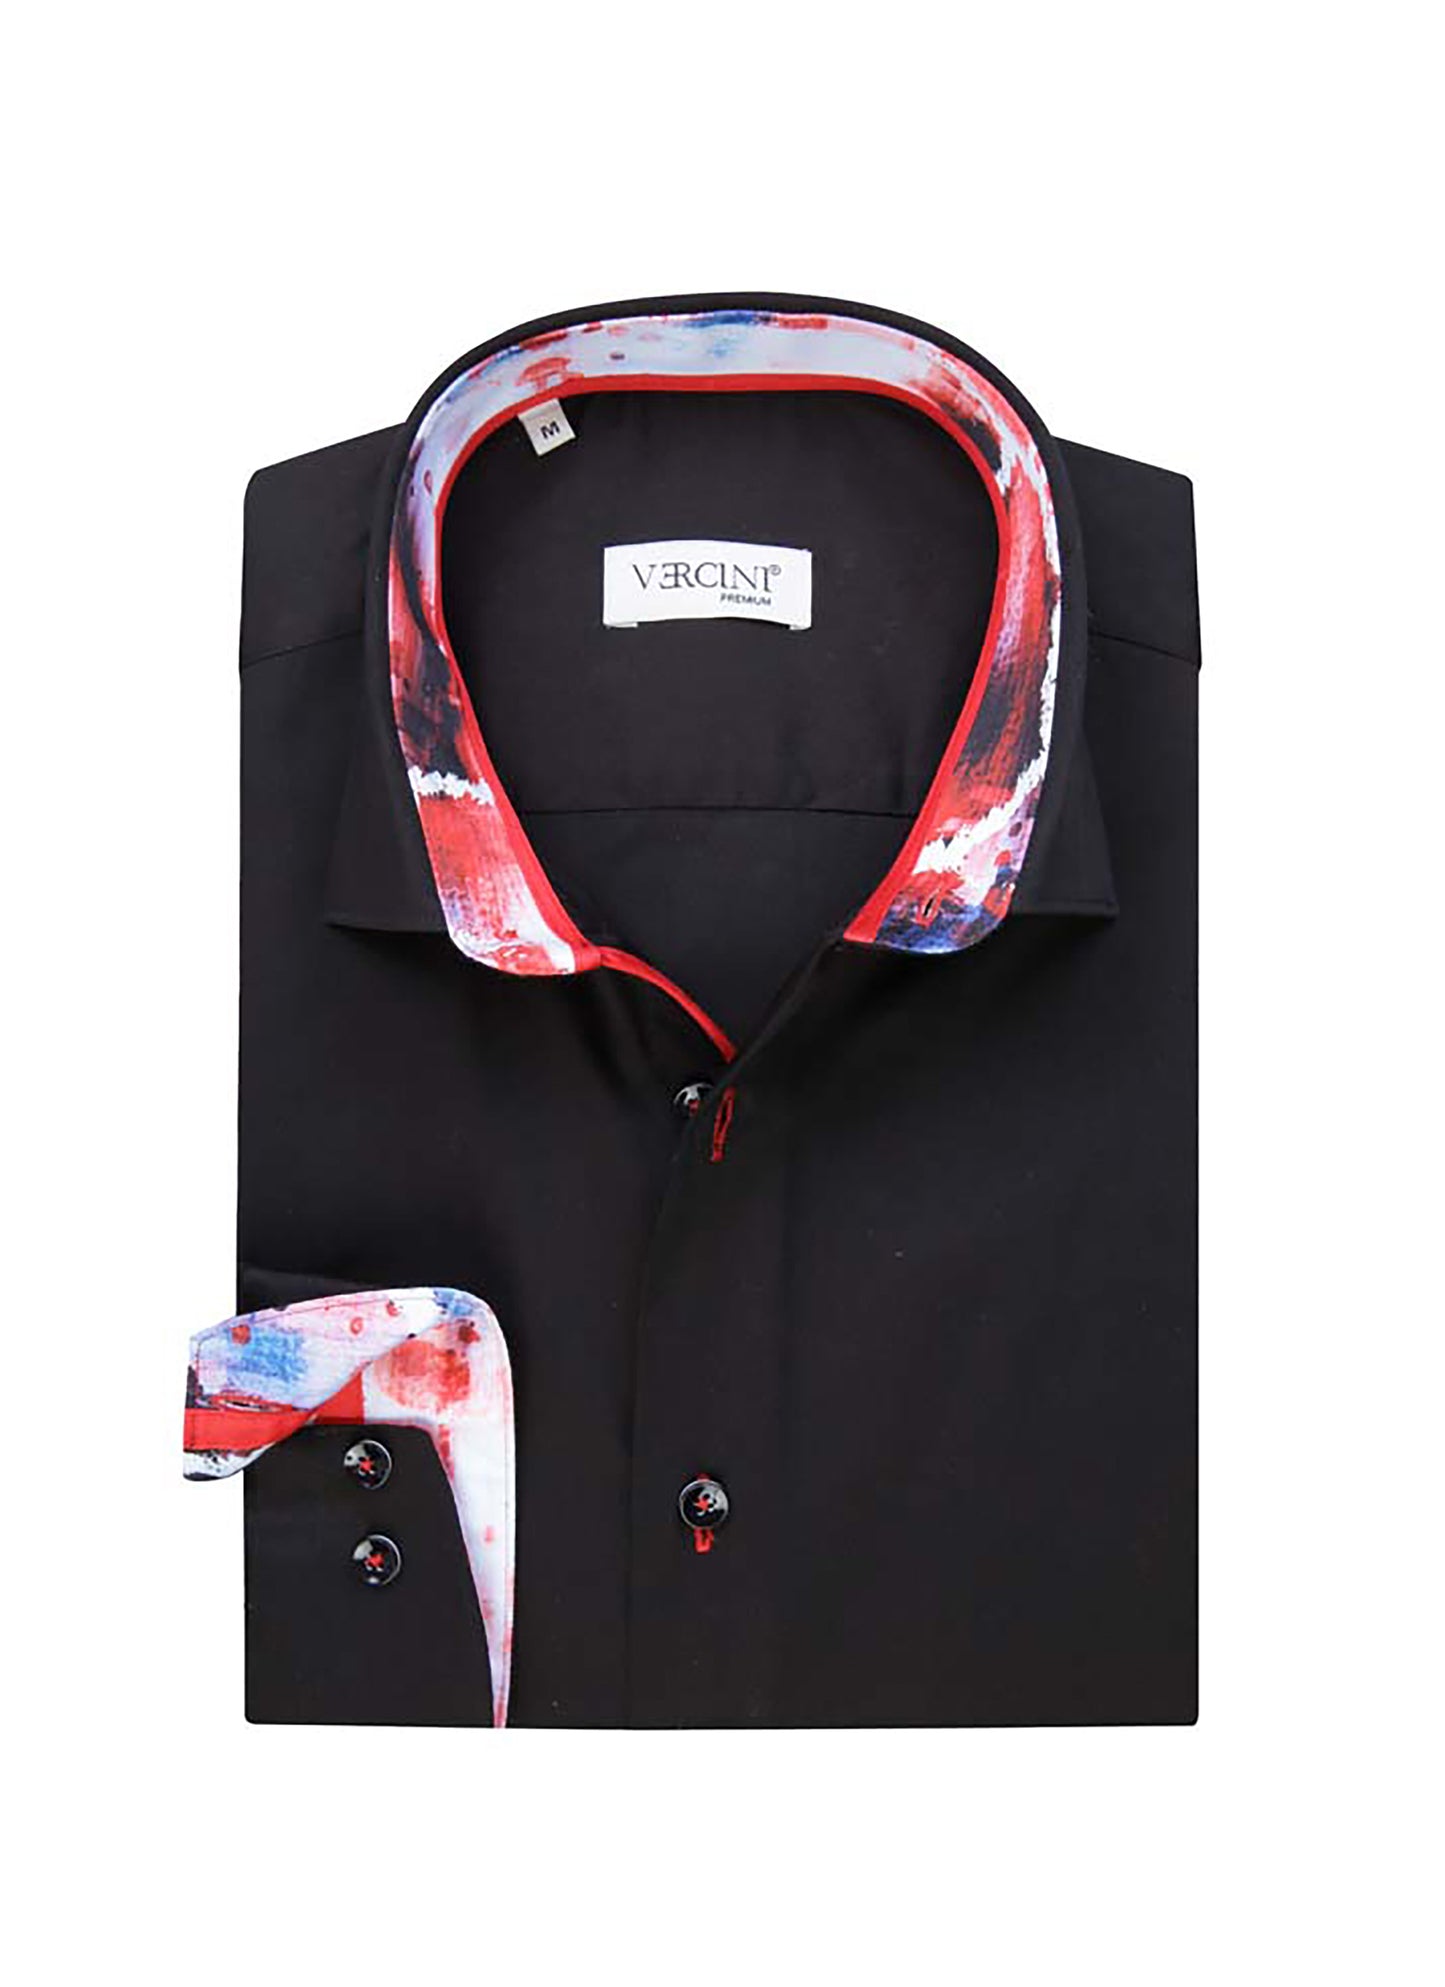 black and red shirt v3 CASUAL SHIRT On Sale 30% Off Vercini